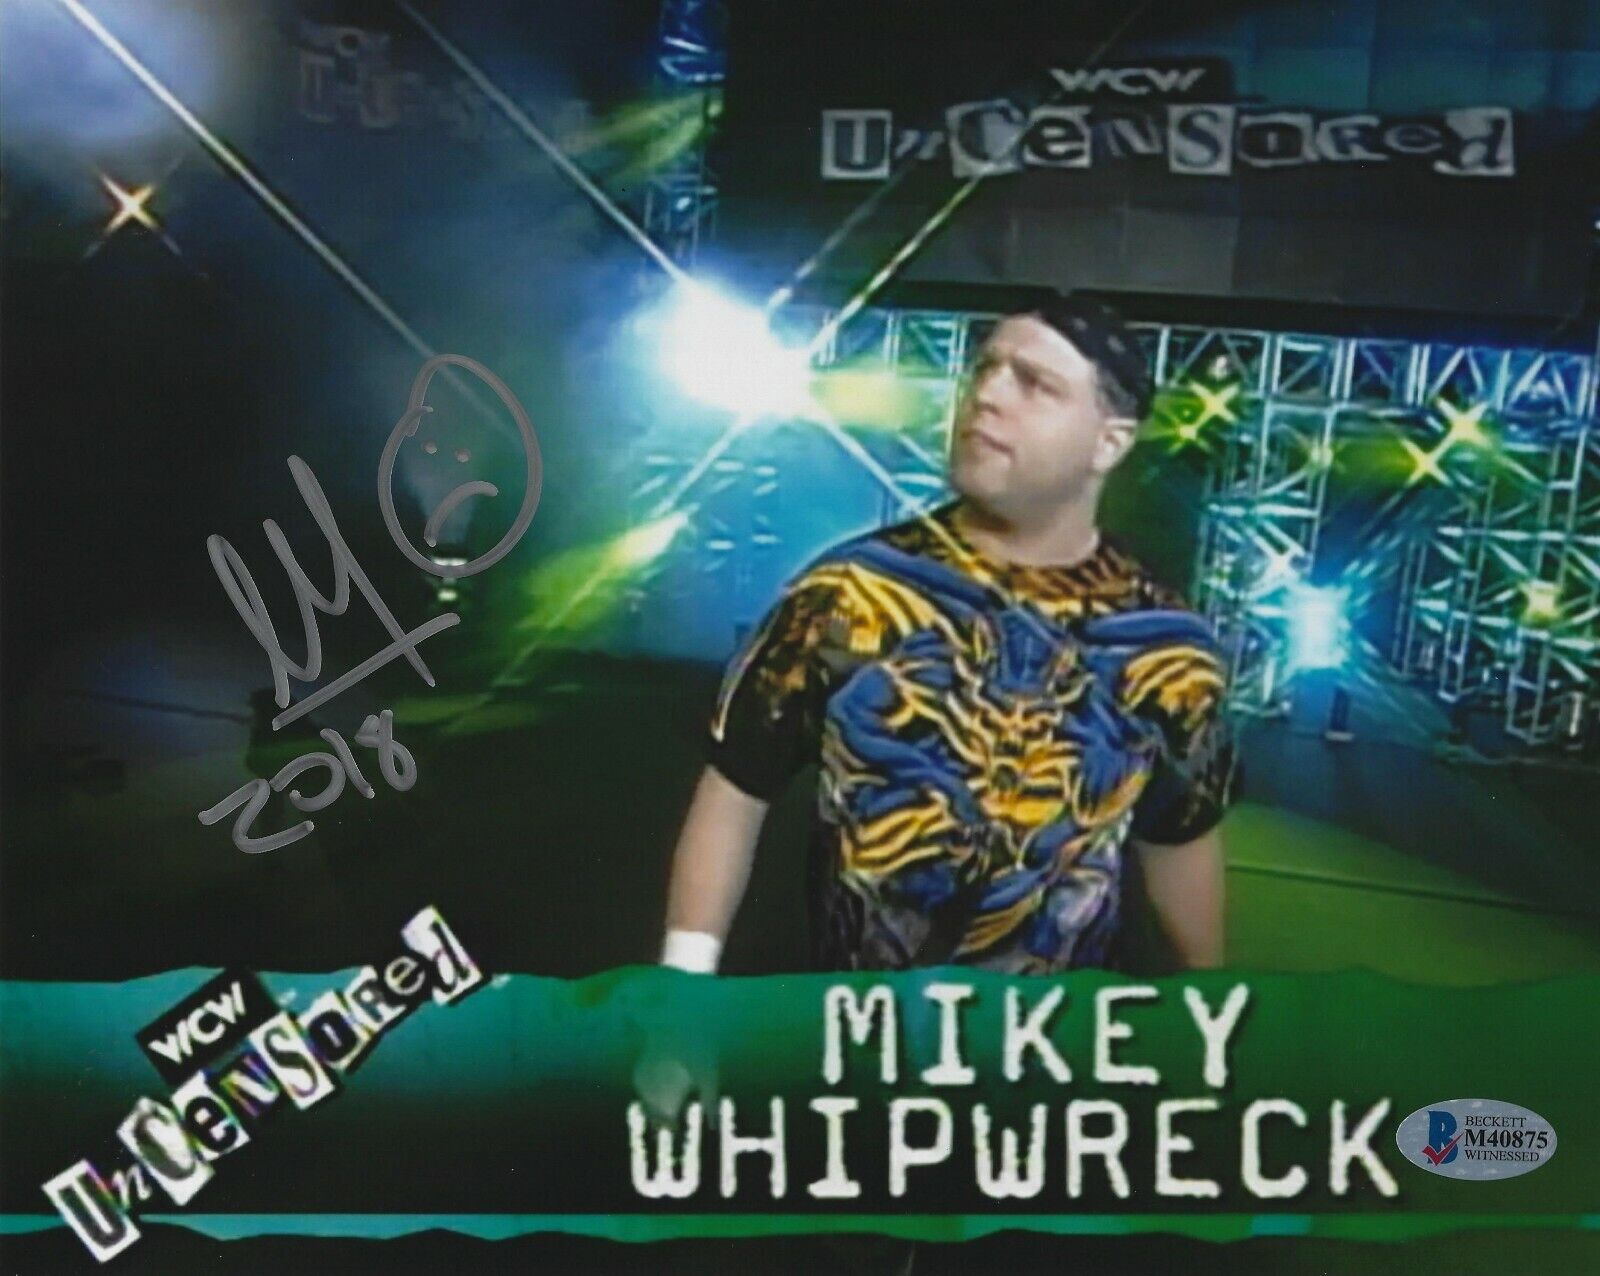 Mikey Whipwreck Signed 8x10 Photo Poster painting BAS Beckett COA WWE ECW WCW Wrestling Auto'd 3